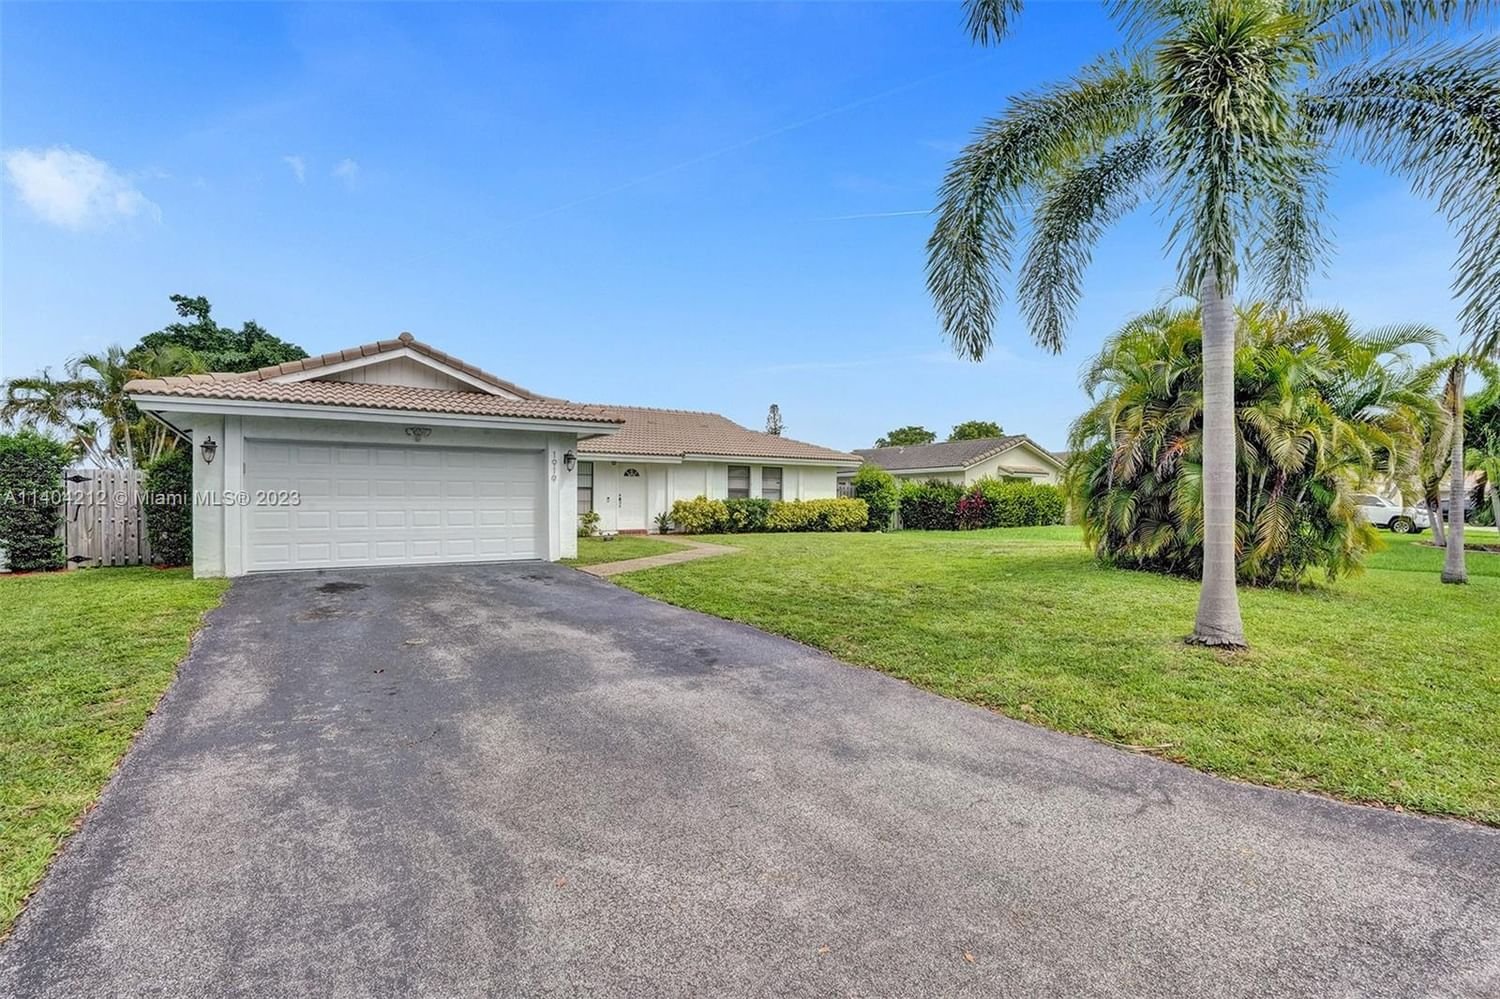 Real estate property located at 1919 85th Dr, Broward County, Coral Springs, FL